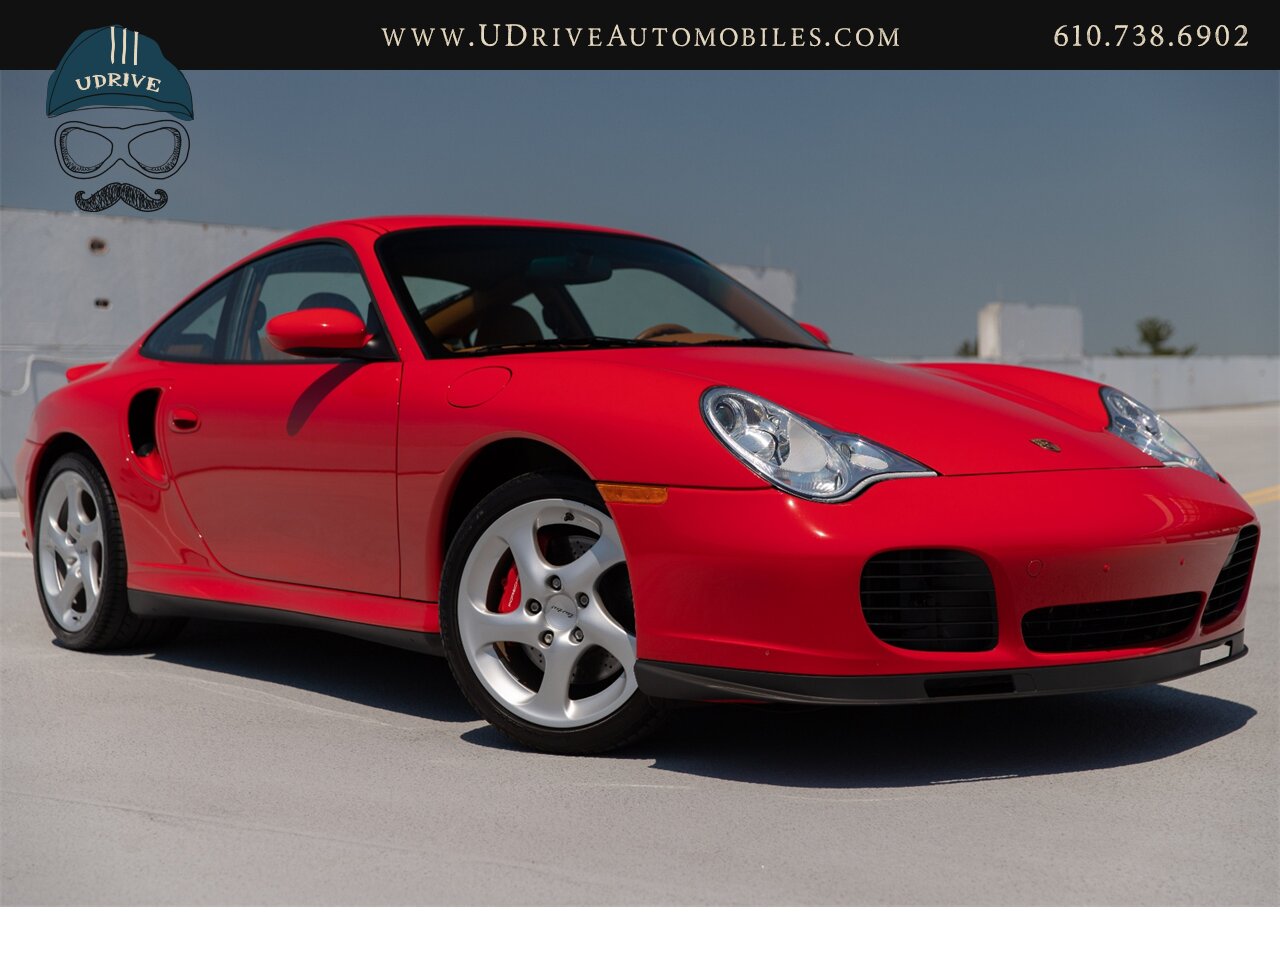 2003 Porsche 911 Turbo 996 Turbo X50 Power Kit 6 Speed Manual  Rare Color Guards Red over Brown Natural Leather - Photo 5 - West Chester, PA 19382